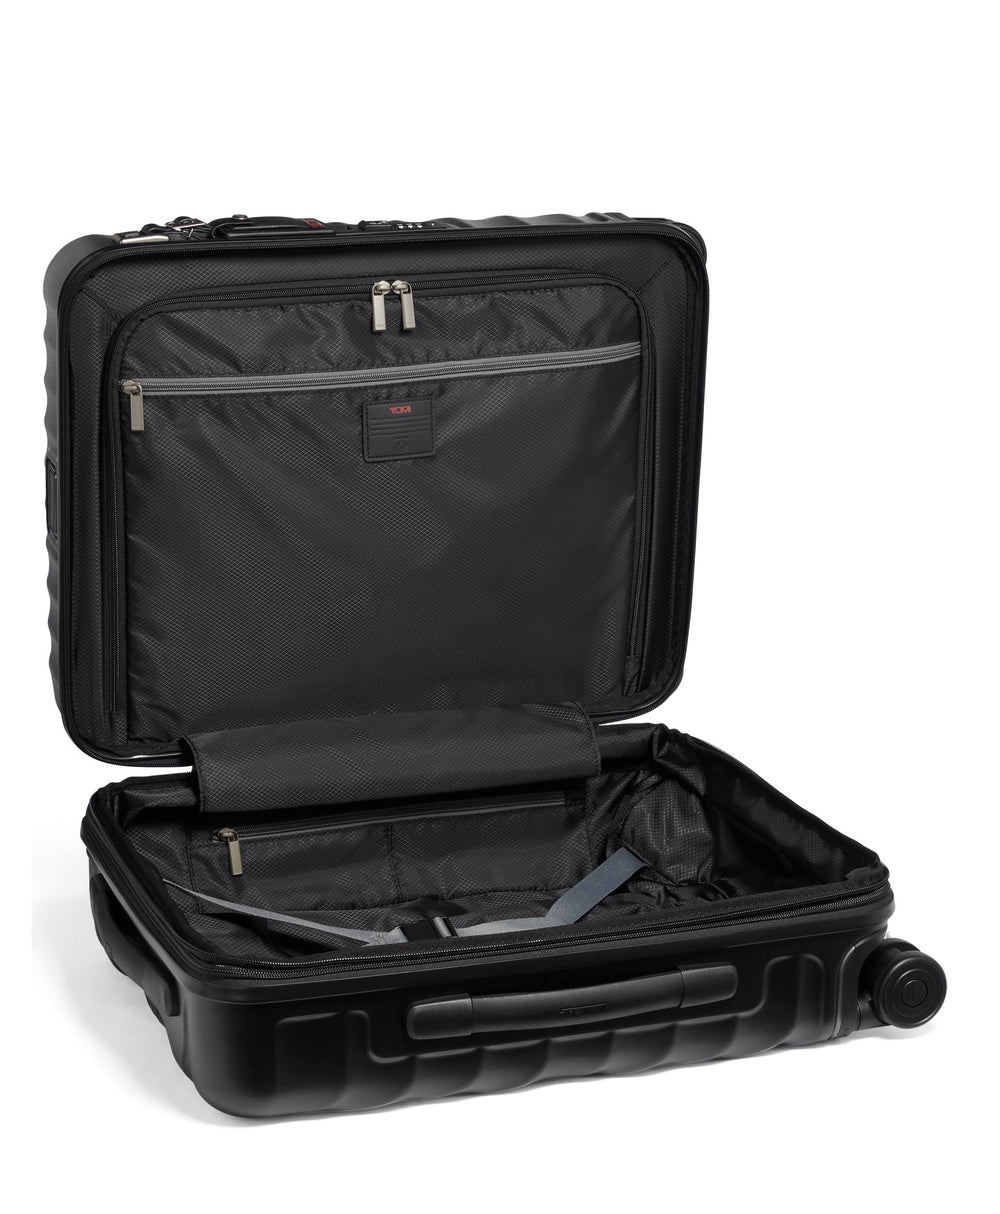 Continental Expandable 4 Wheeled Carry On